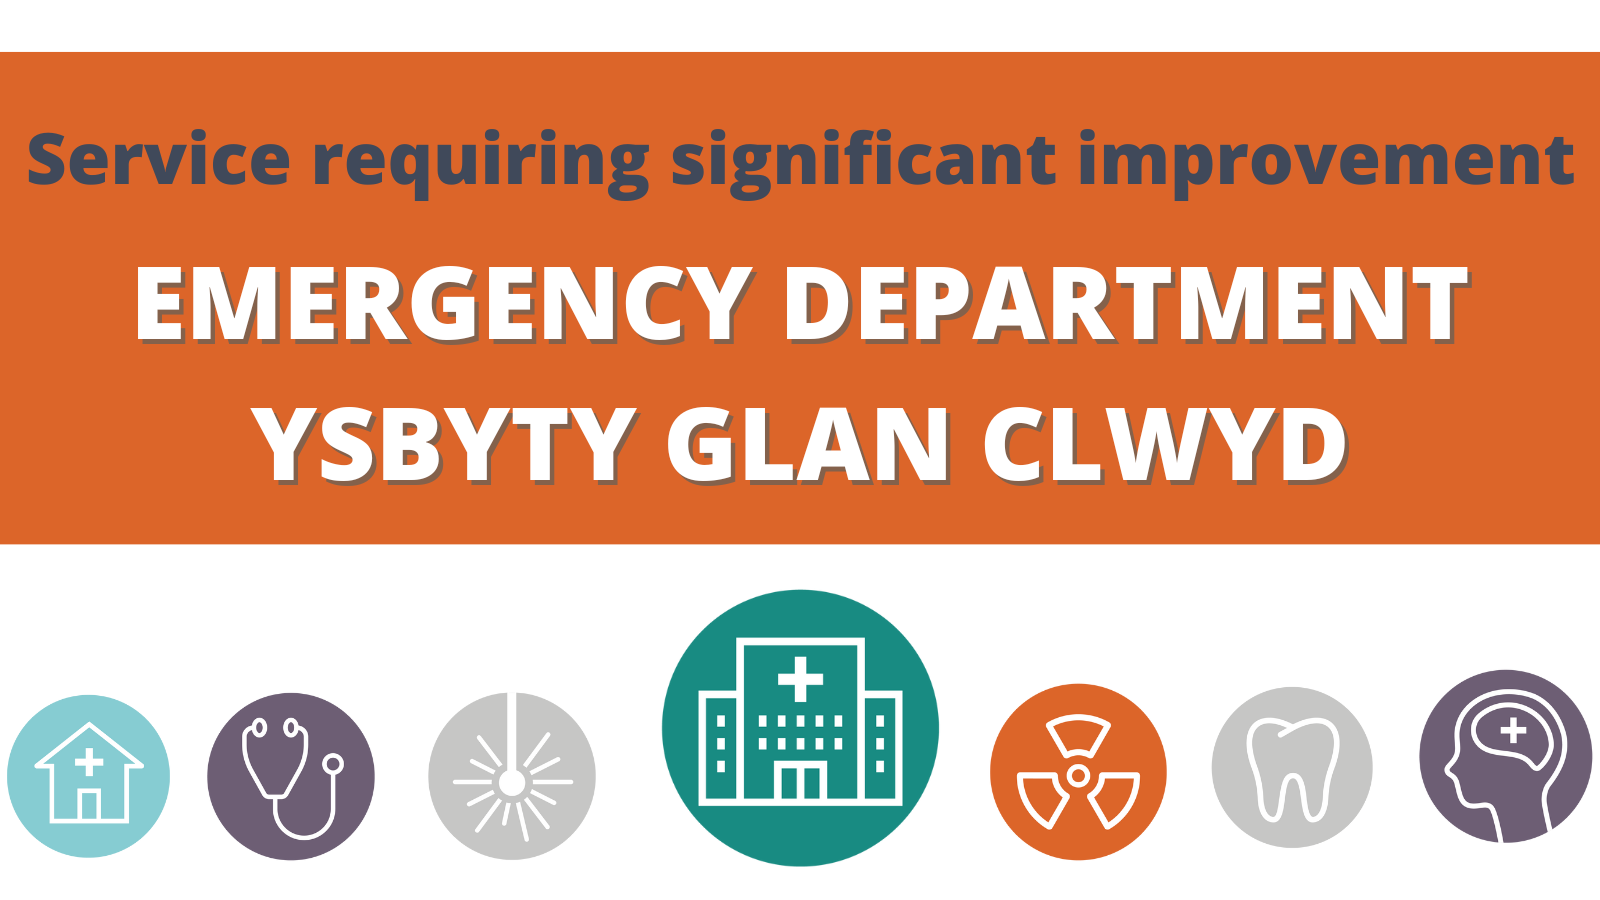 Service requiring significant improvement - Ysbyty Glan Clwyd, Emergency Department